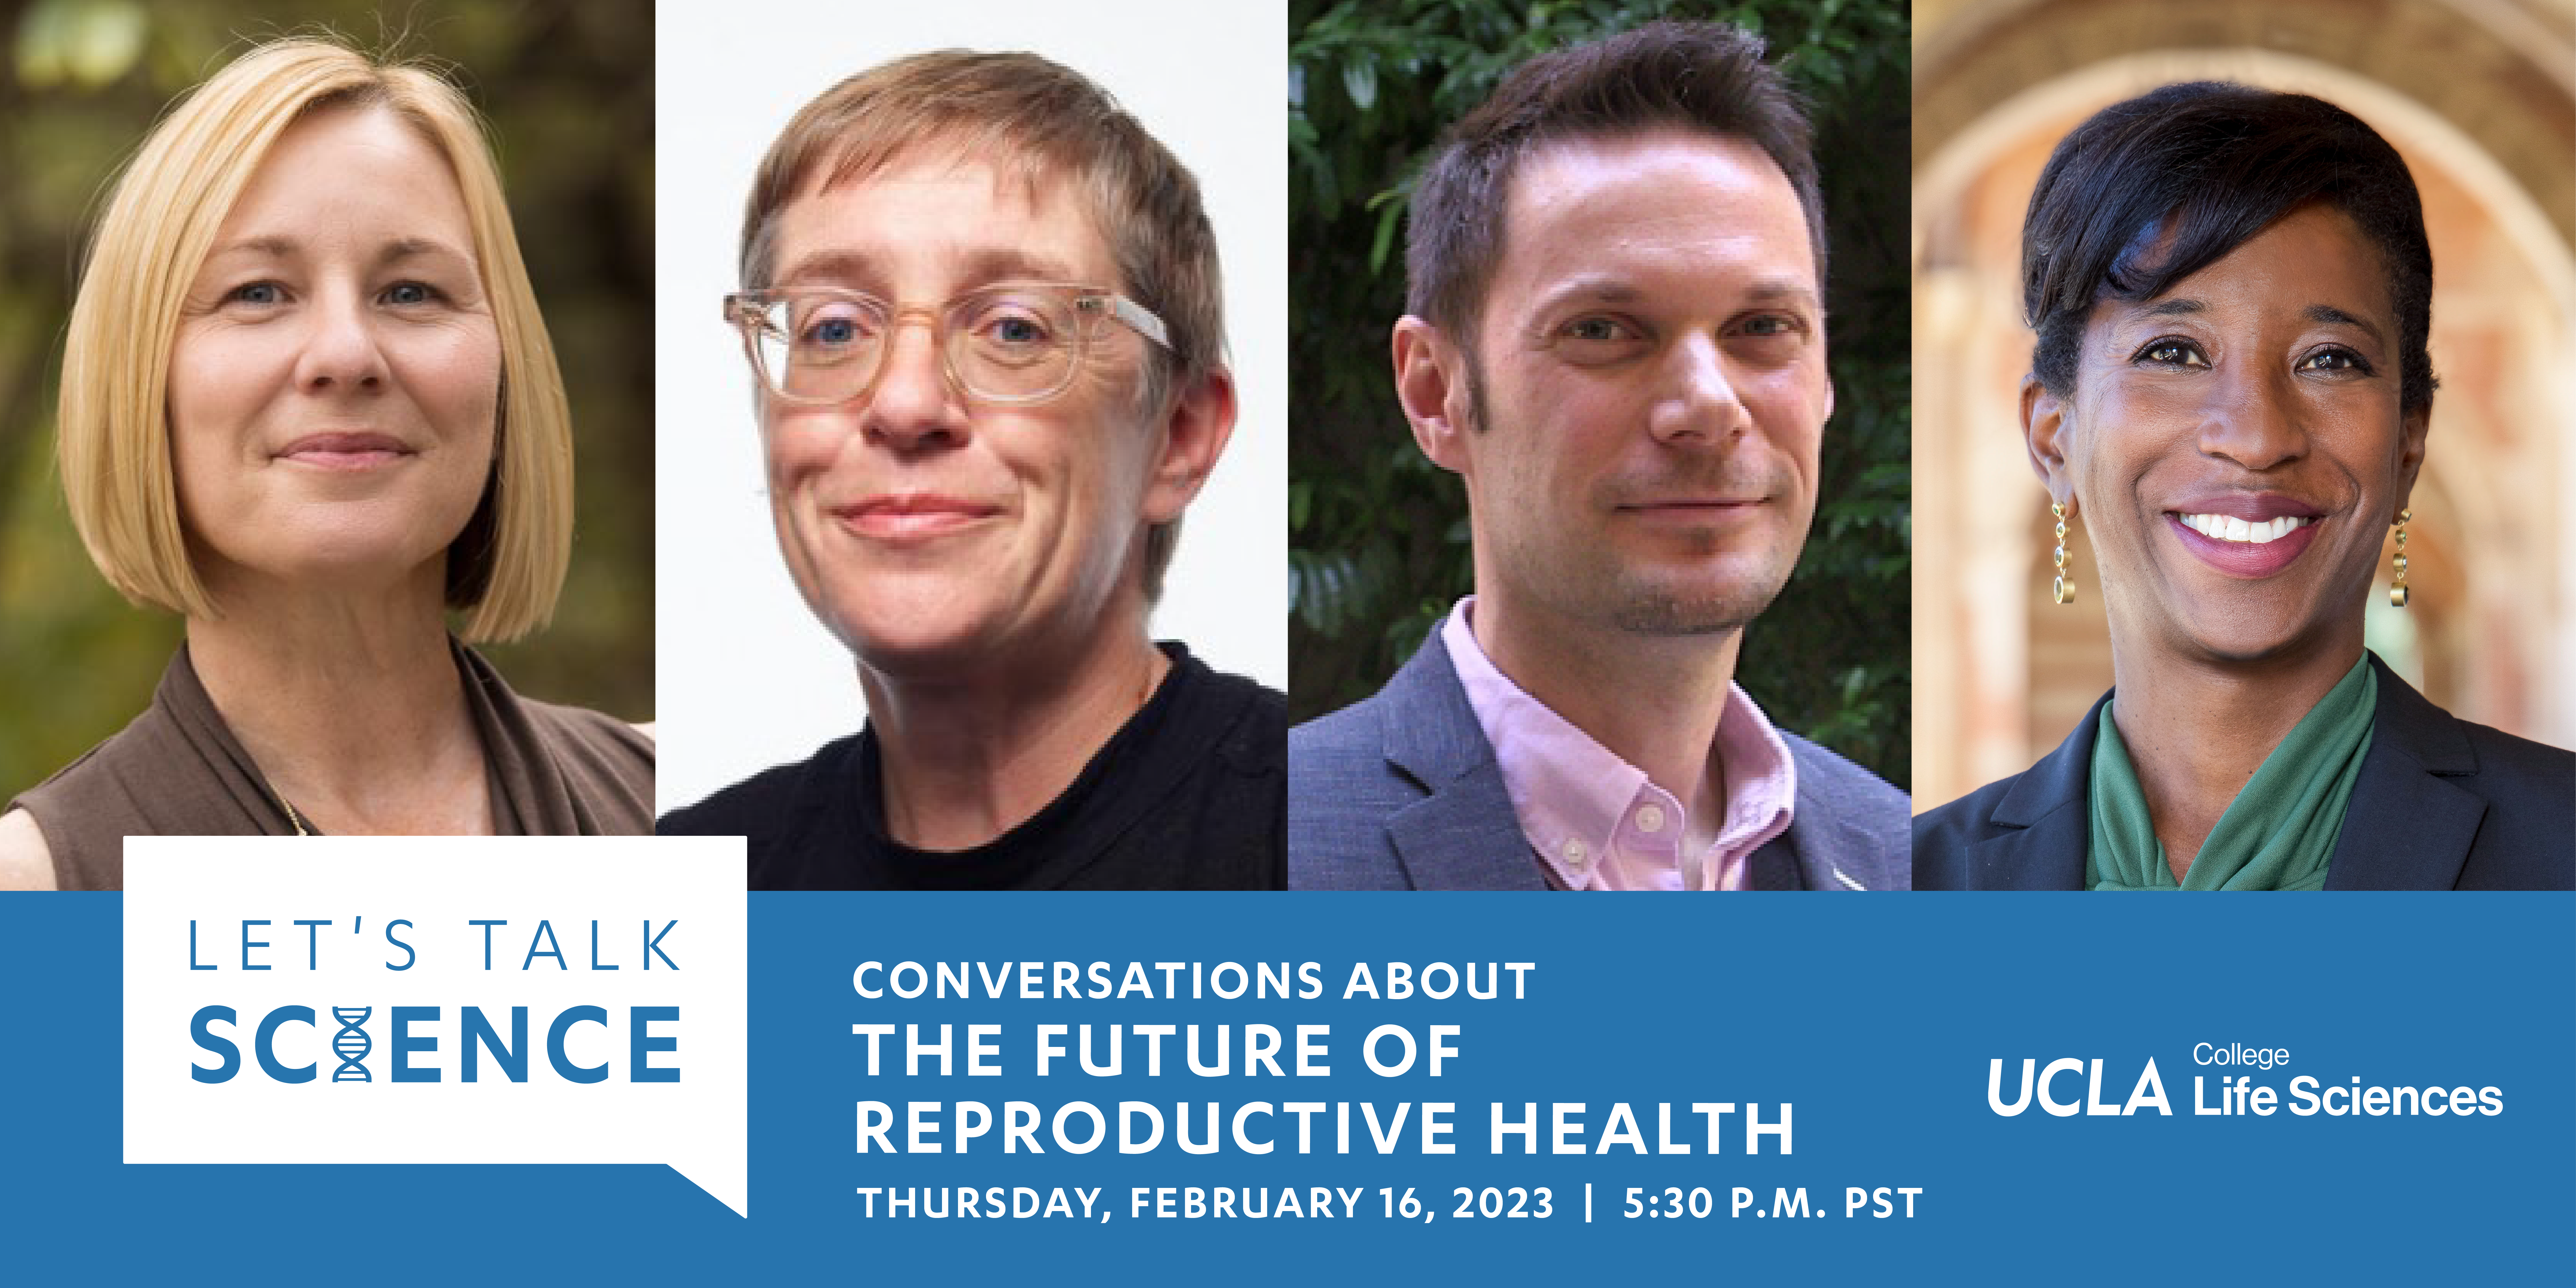 Let’s Talk Science: Conversations About the Future of Reproductive Health